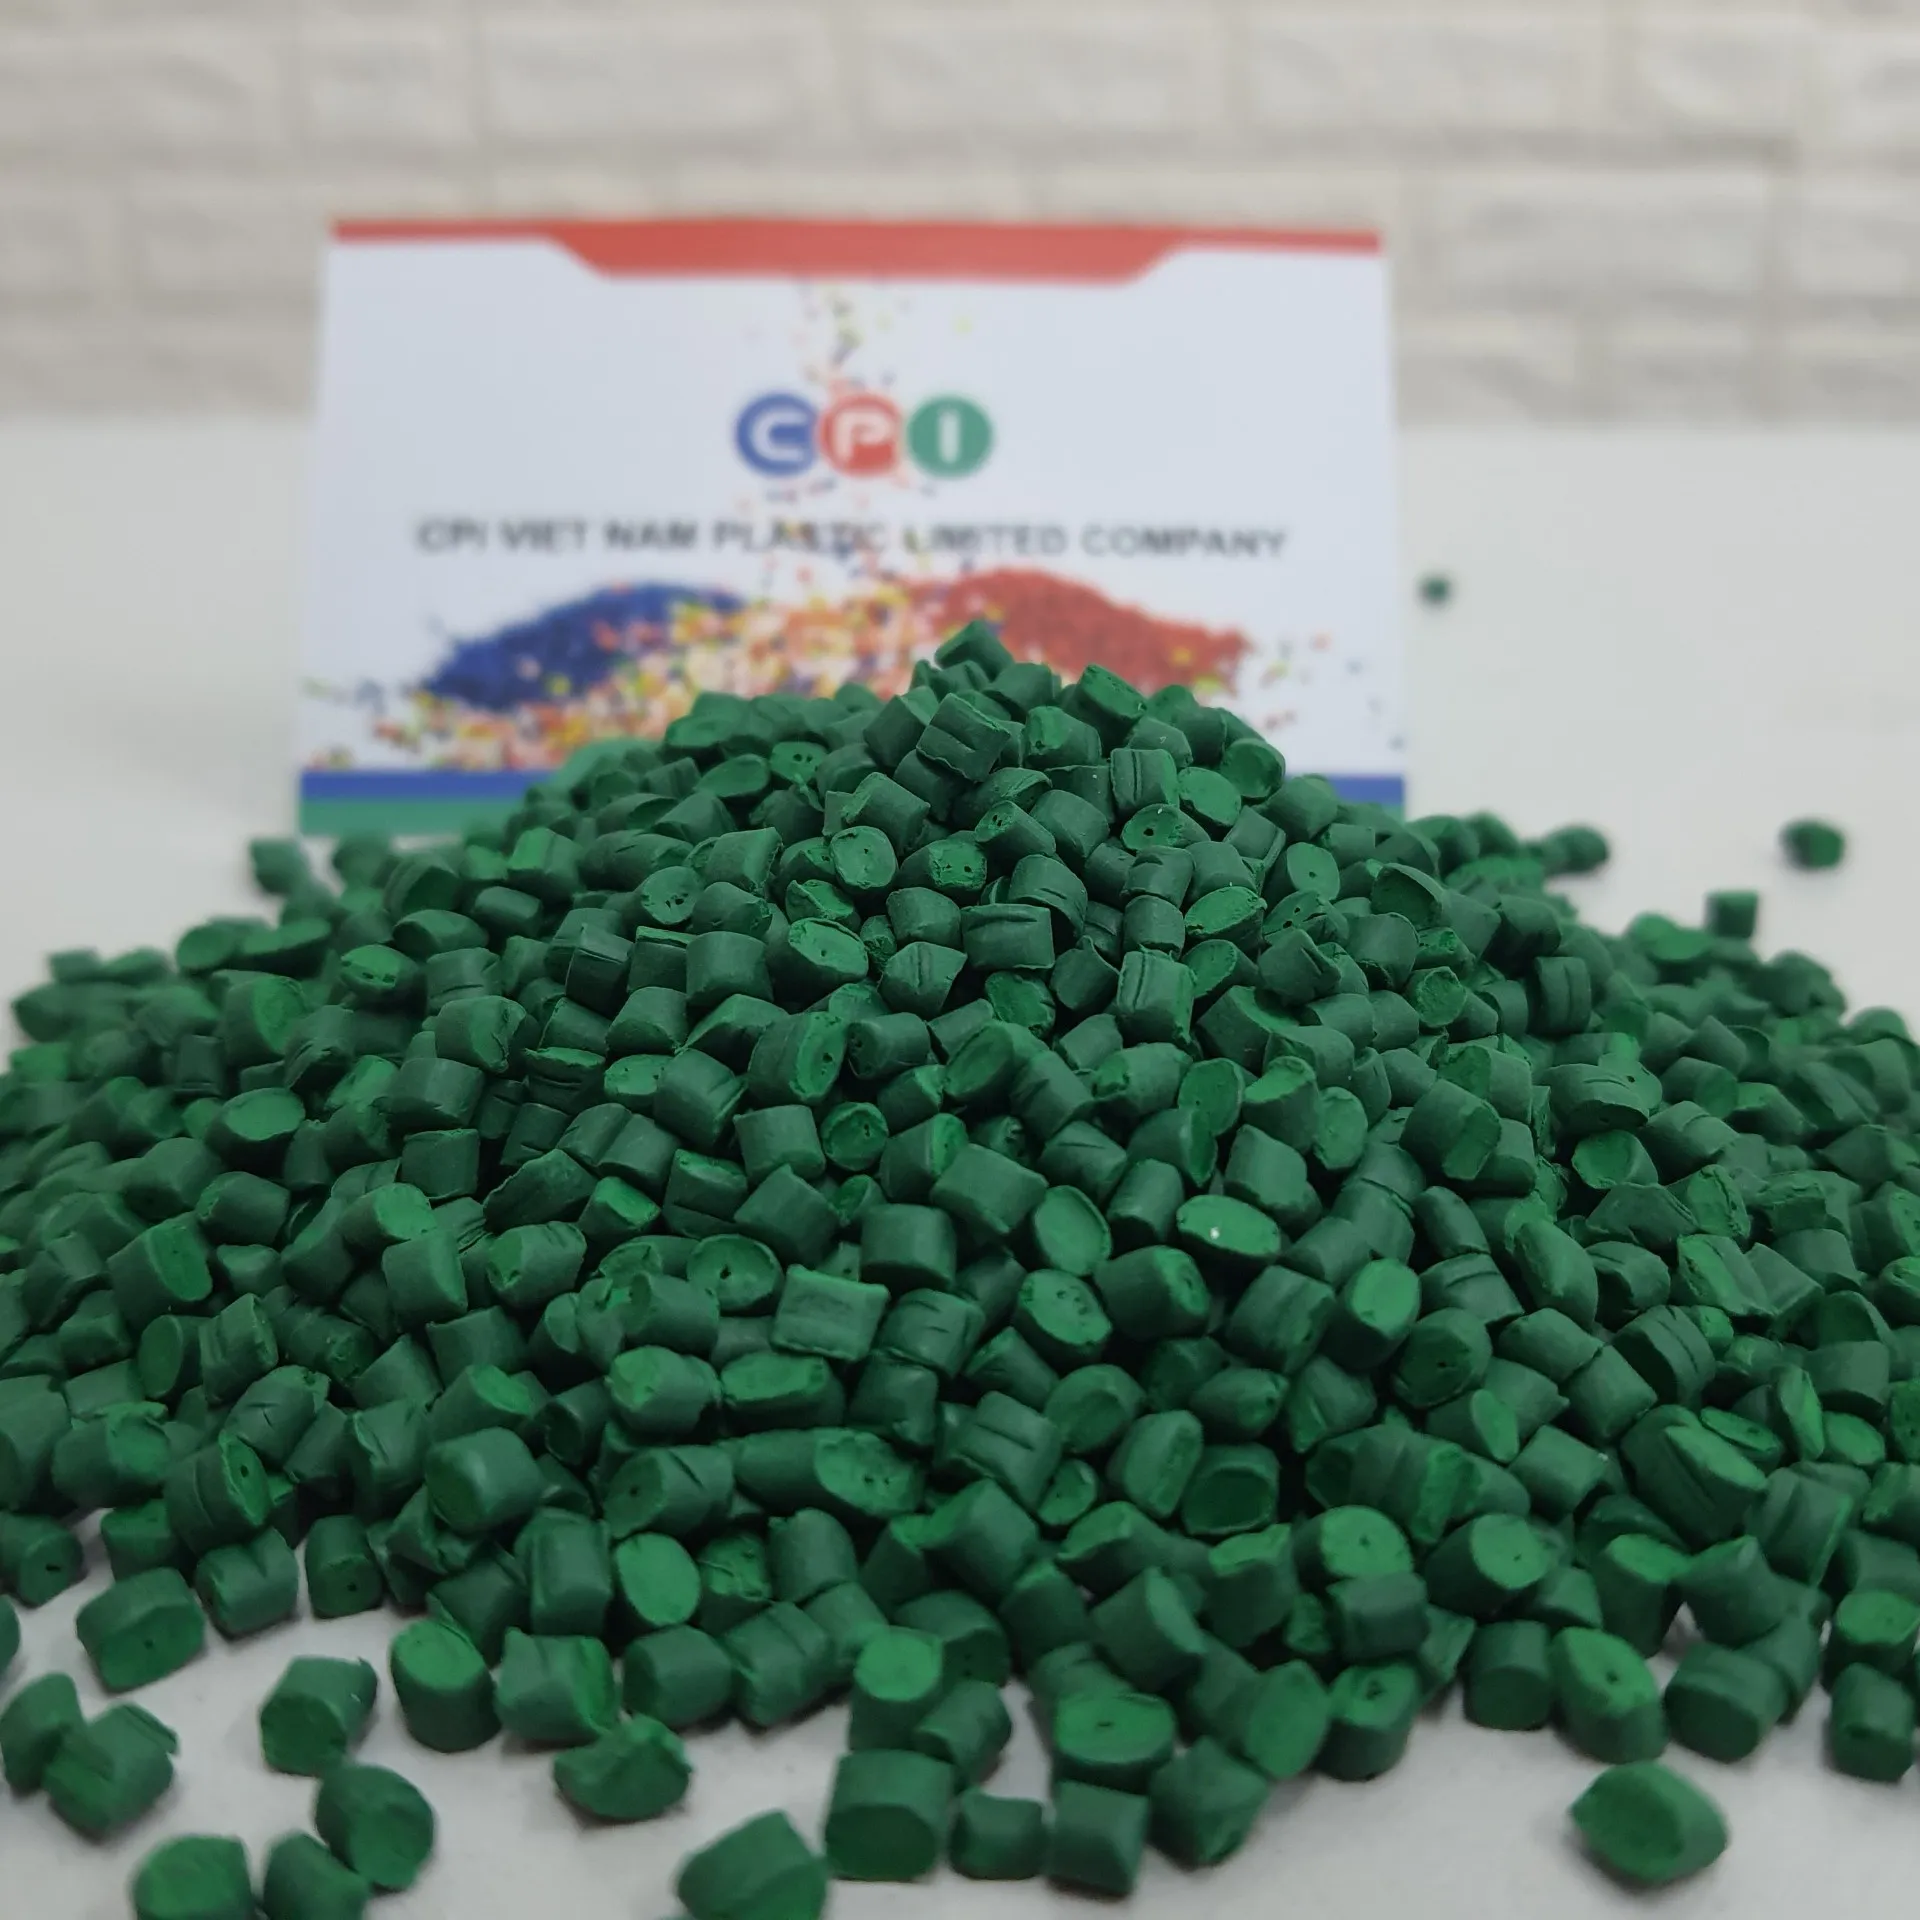 COLOR MASTERBATCH / GREEN PIGMENT - GREEN MASTERBATCH - VIETNAM FACTORY - GOOD DISPERSION FOR PE FILM/INJECTION/PPR PIPES...